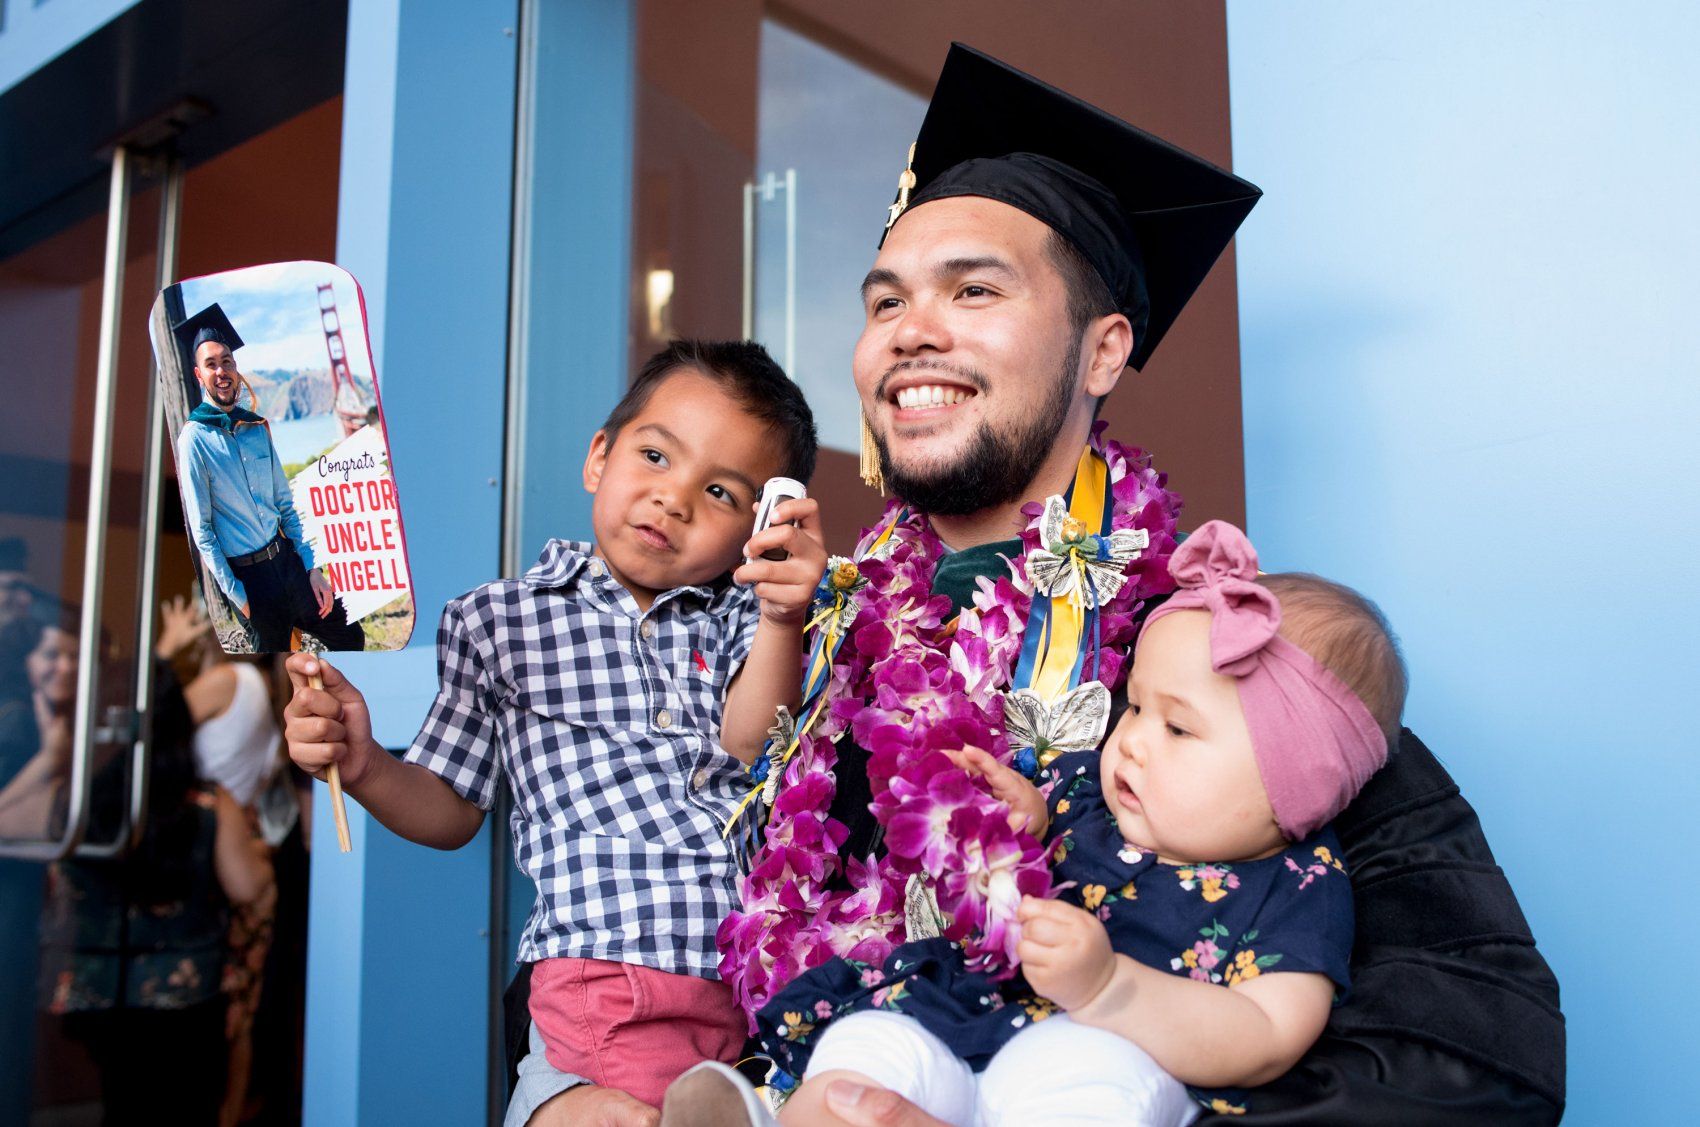 Graduating student with young niece and nephew